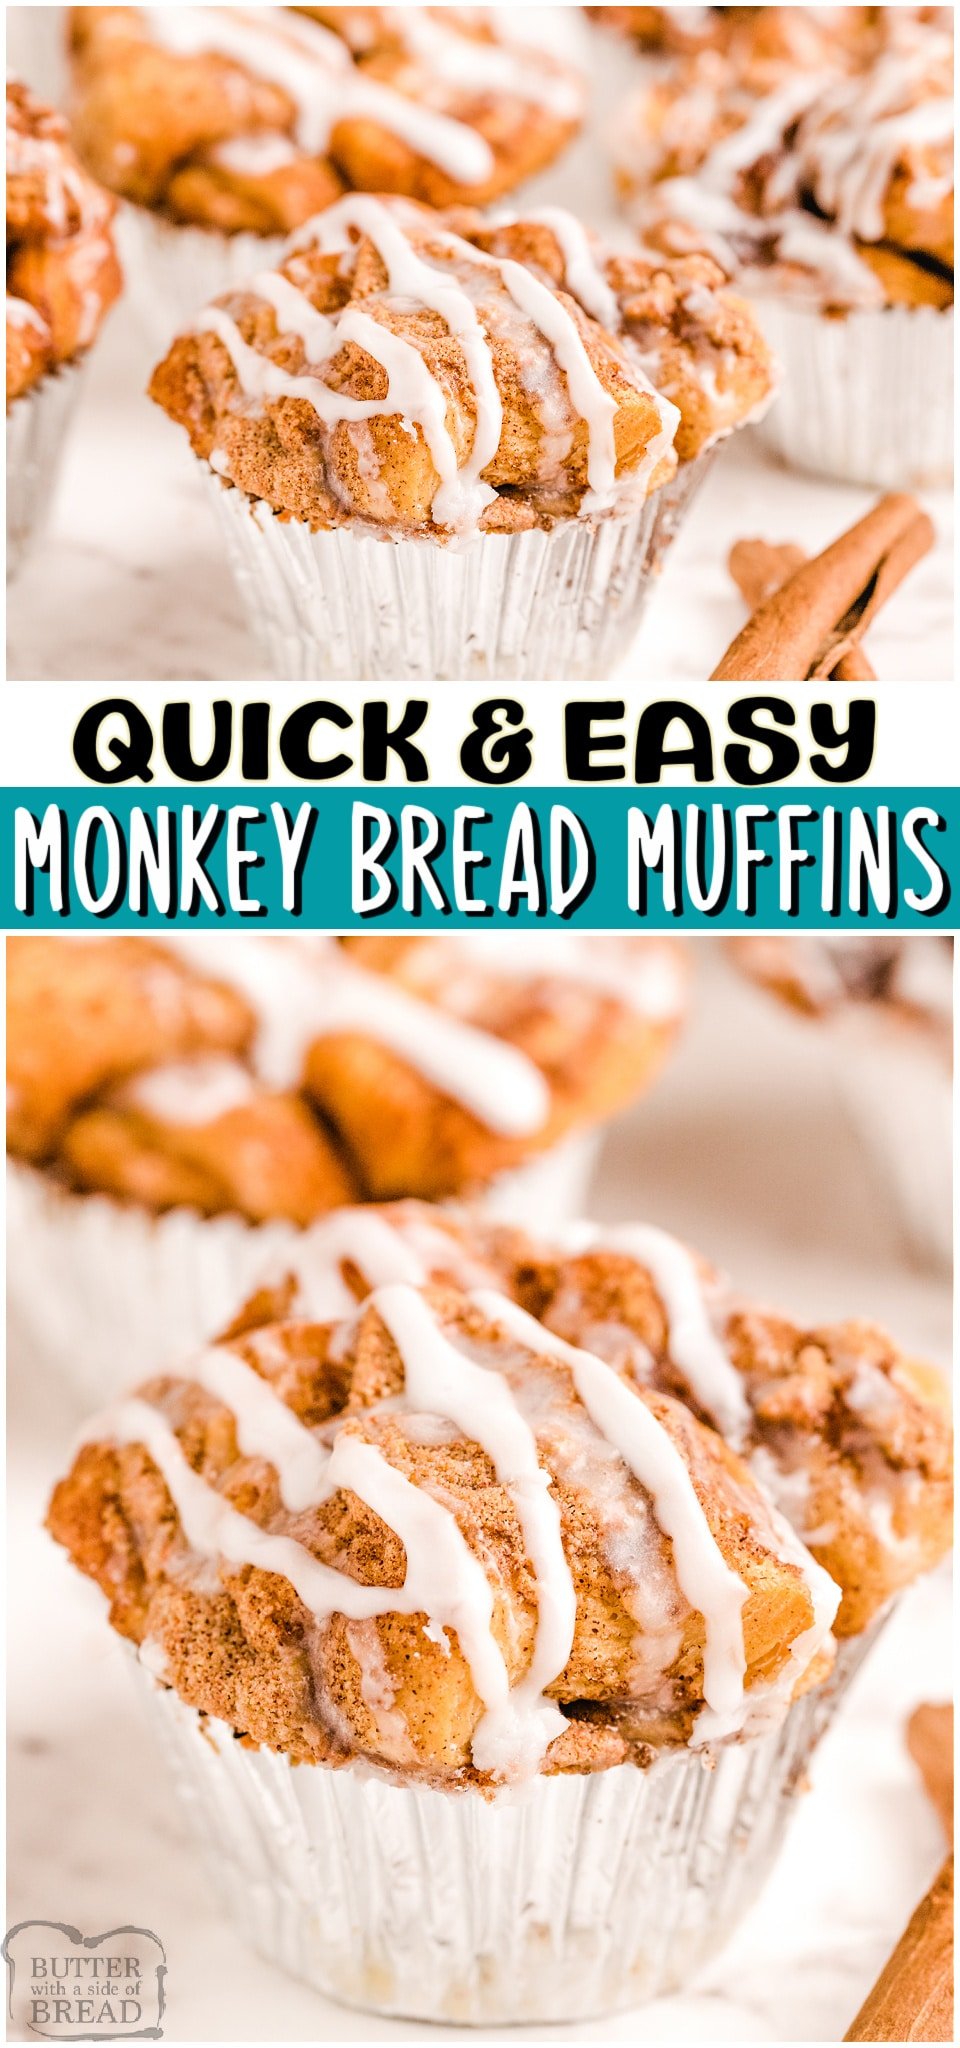 Monkey Bread Muffins made with just a handful of ingredients & ready in 30 minutes! All the buttery sweet butterscotch & cinnamon flavors of Monkey Bread, only in muffin form! 